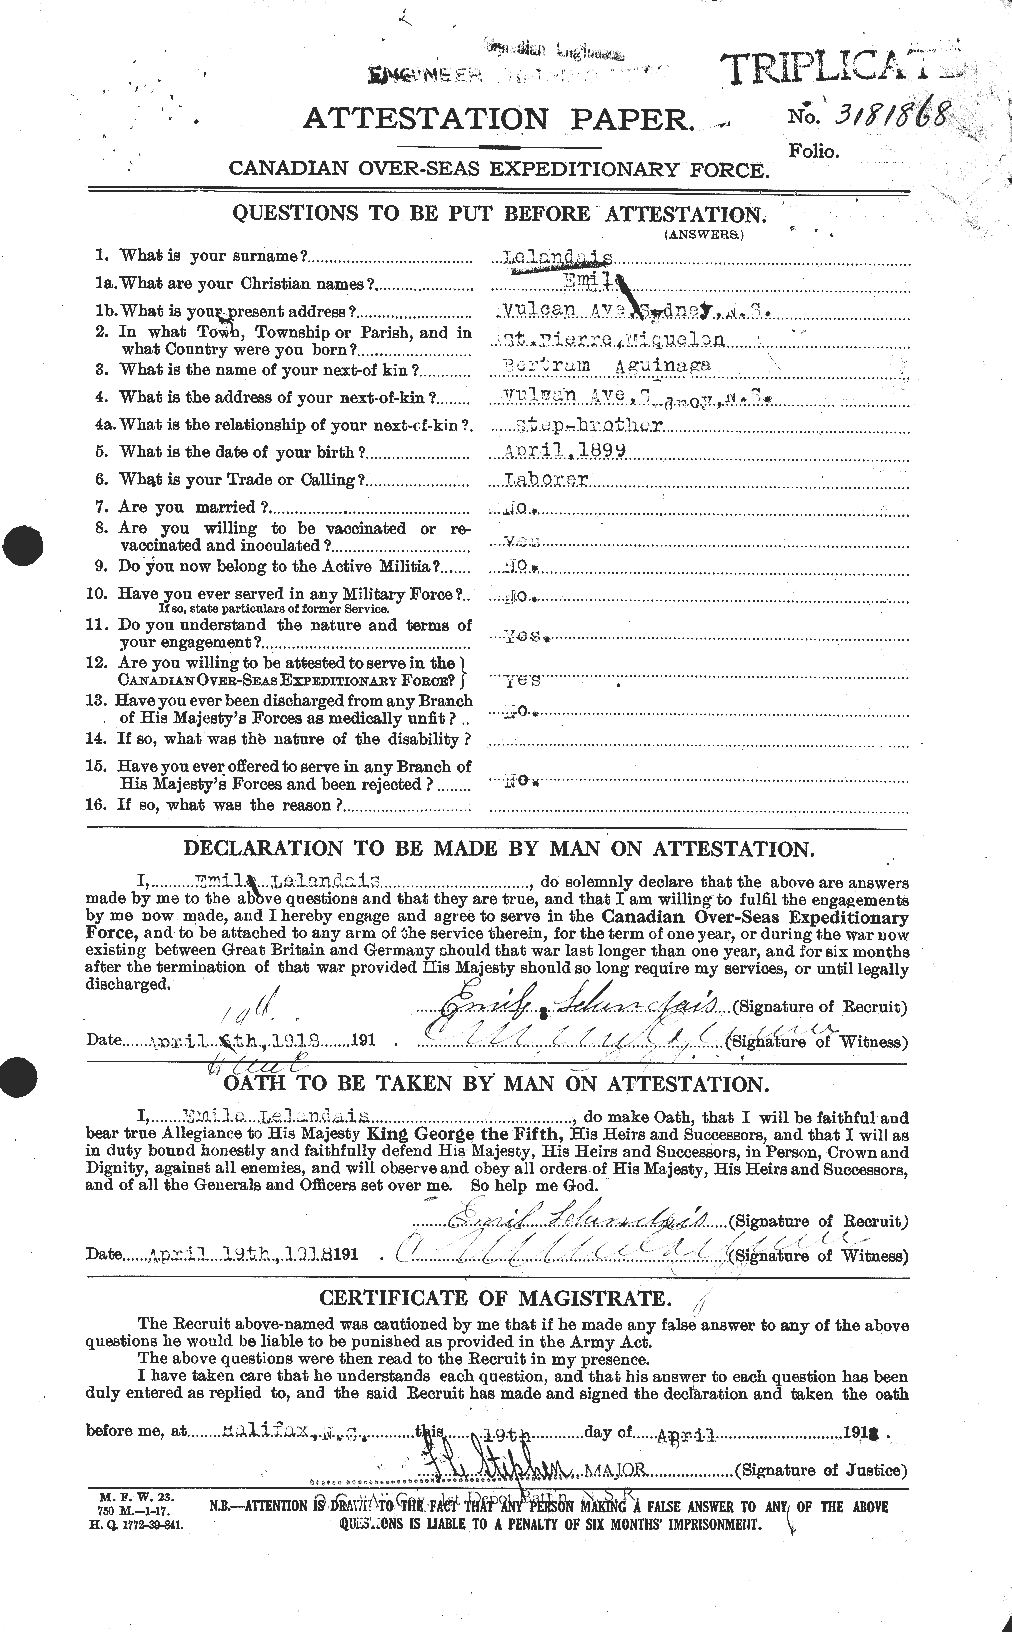 Personnel Records of the First World War - CEF 465631a